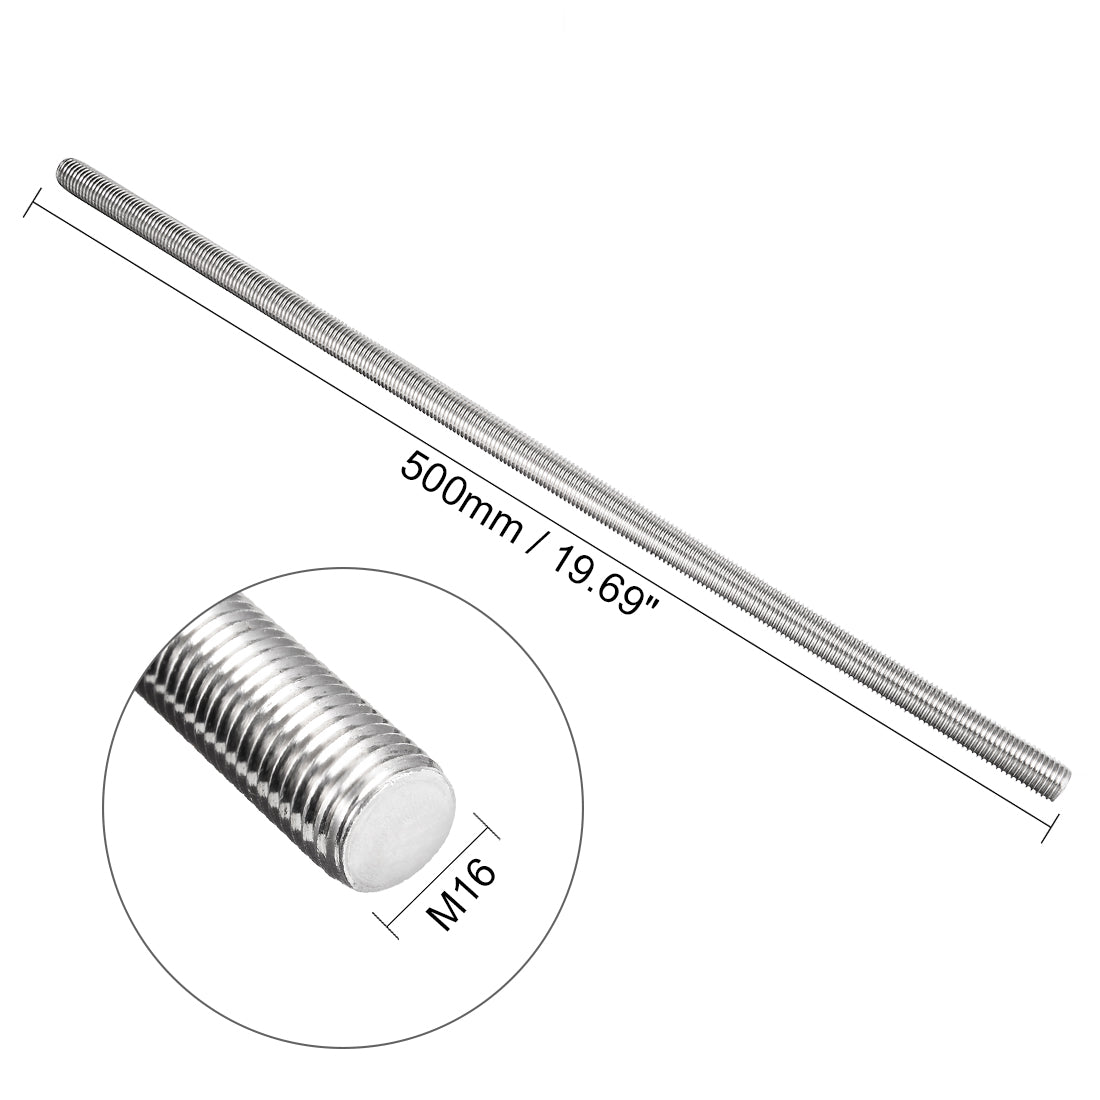 uxcell Uxcell M16 x 500mm Fully Threaded Rod 304 Stainless Steel Right Hand Threads